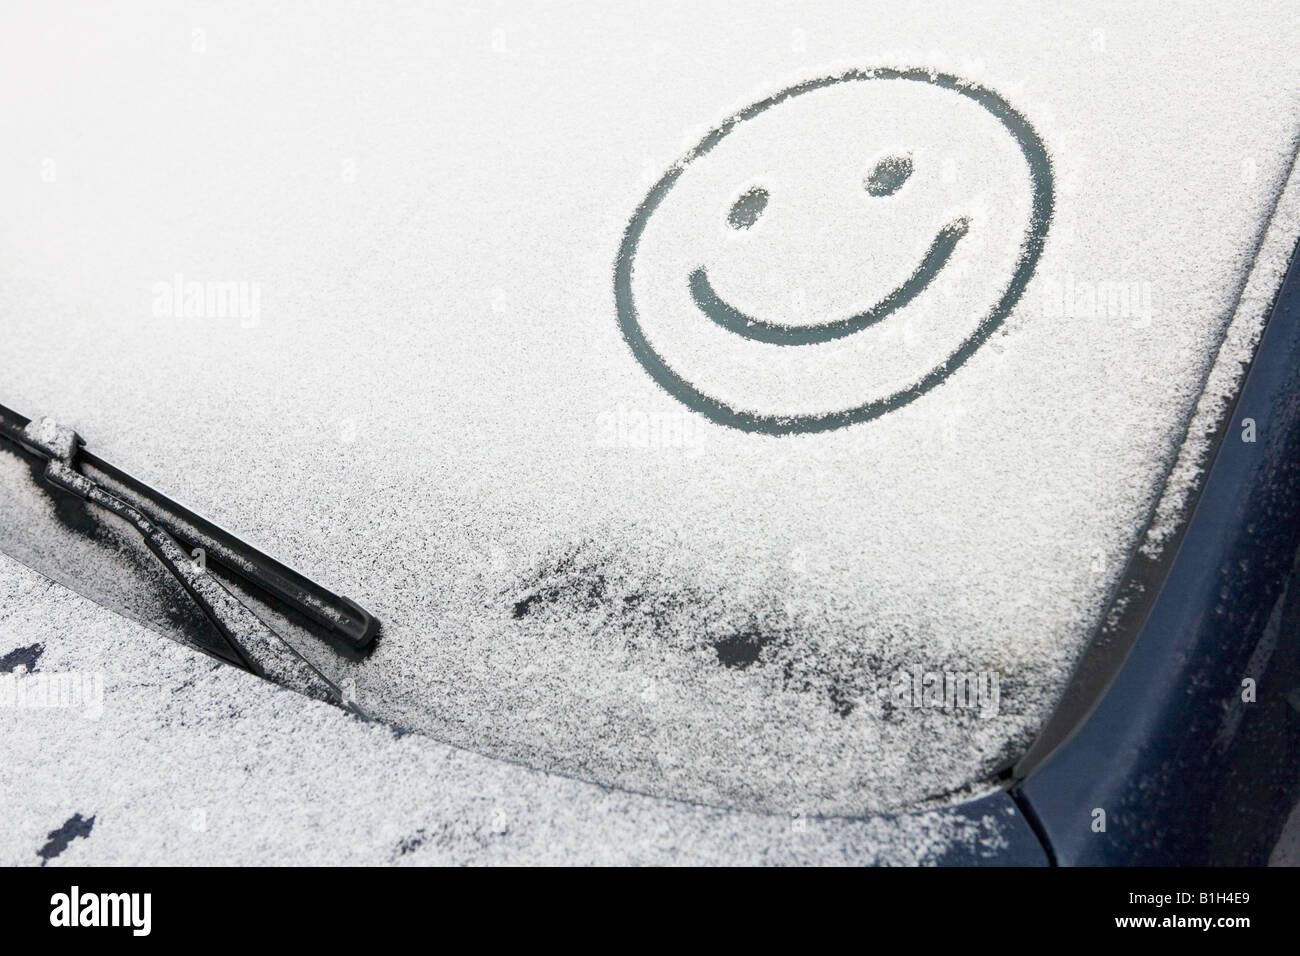 Smiley face in snow on car Stock Photo